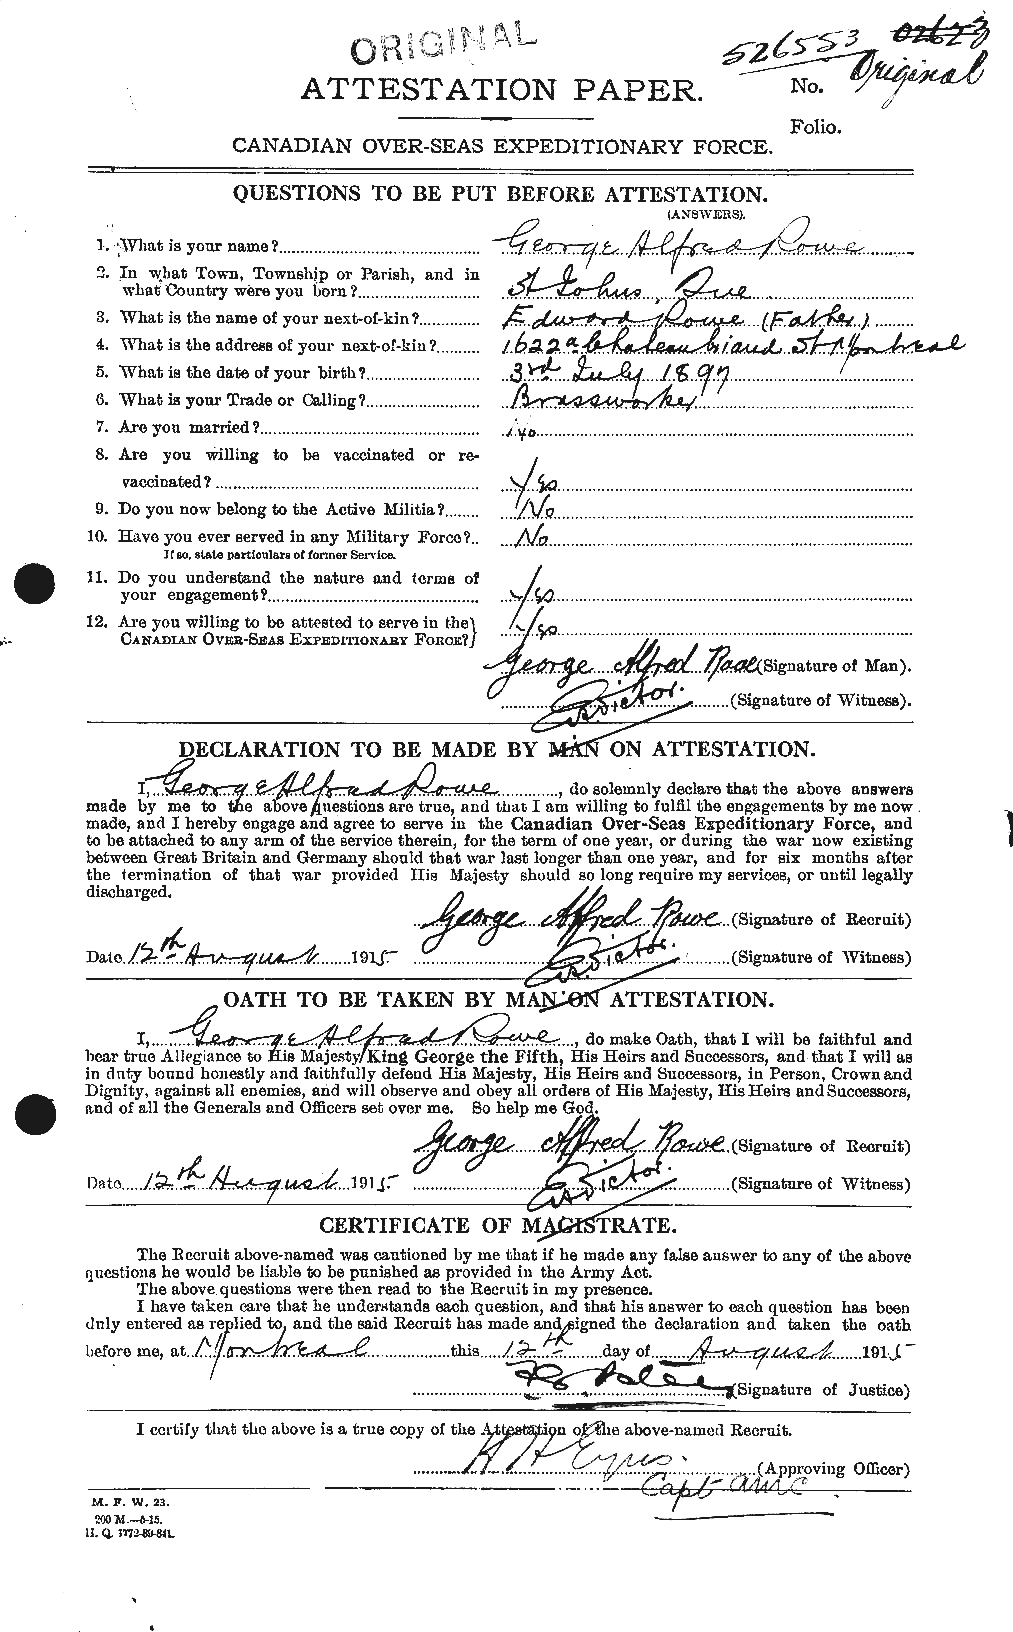 Personnel Records of the First World War - CEF 615878a